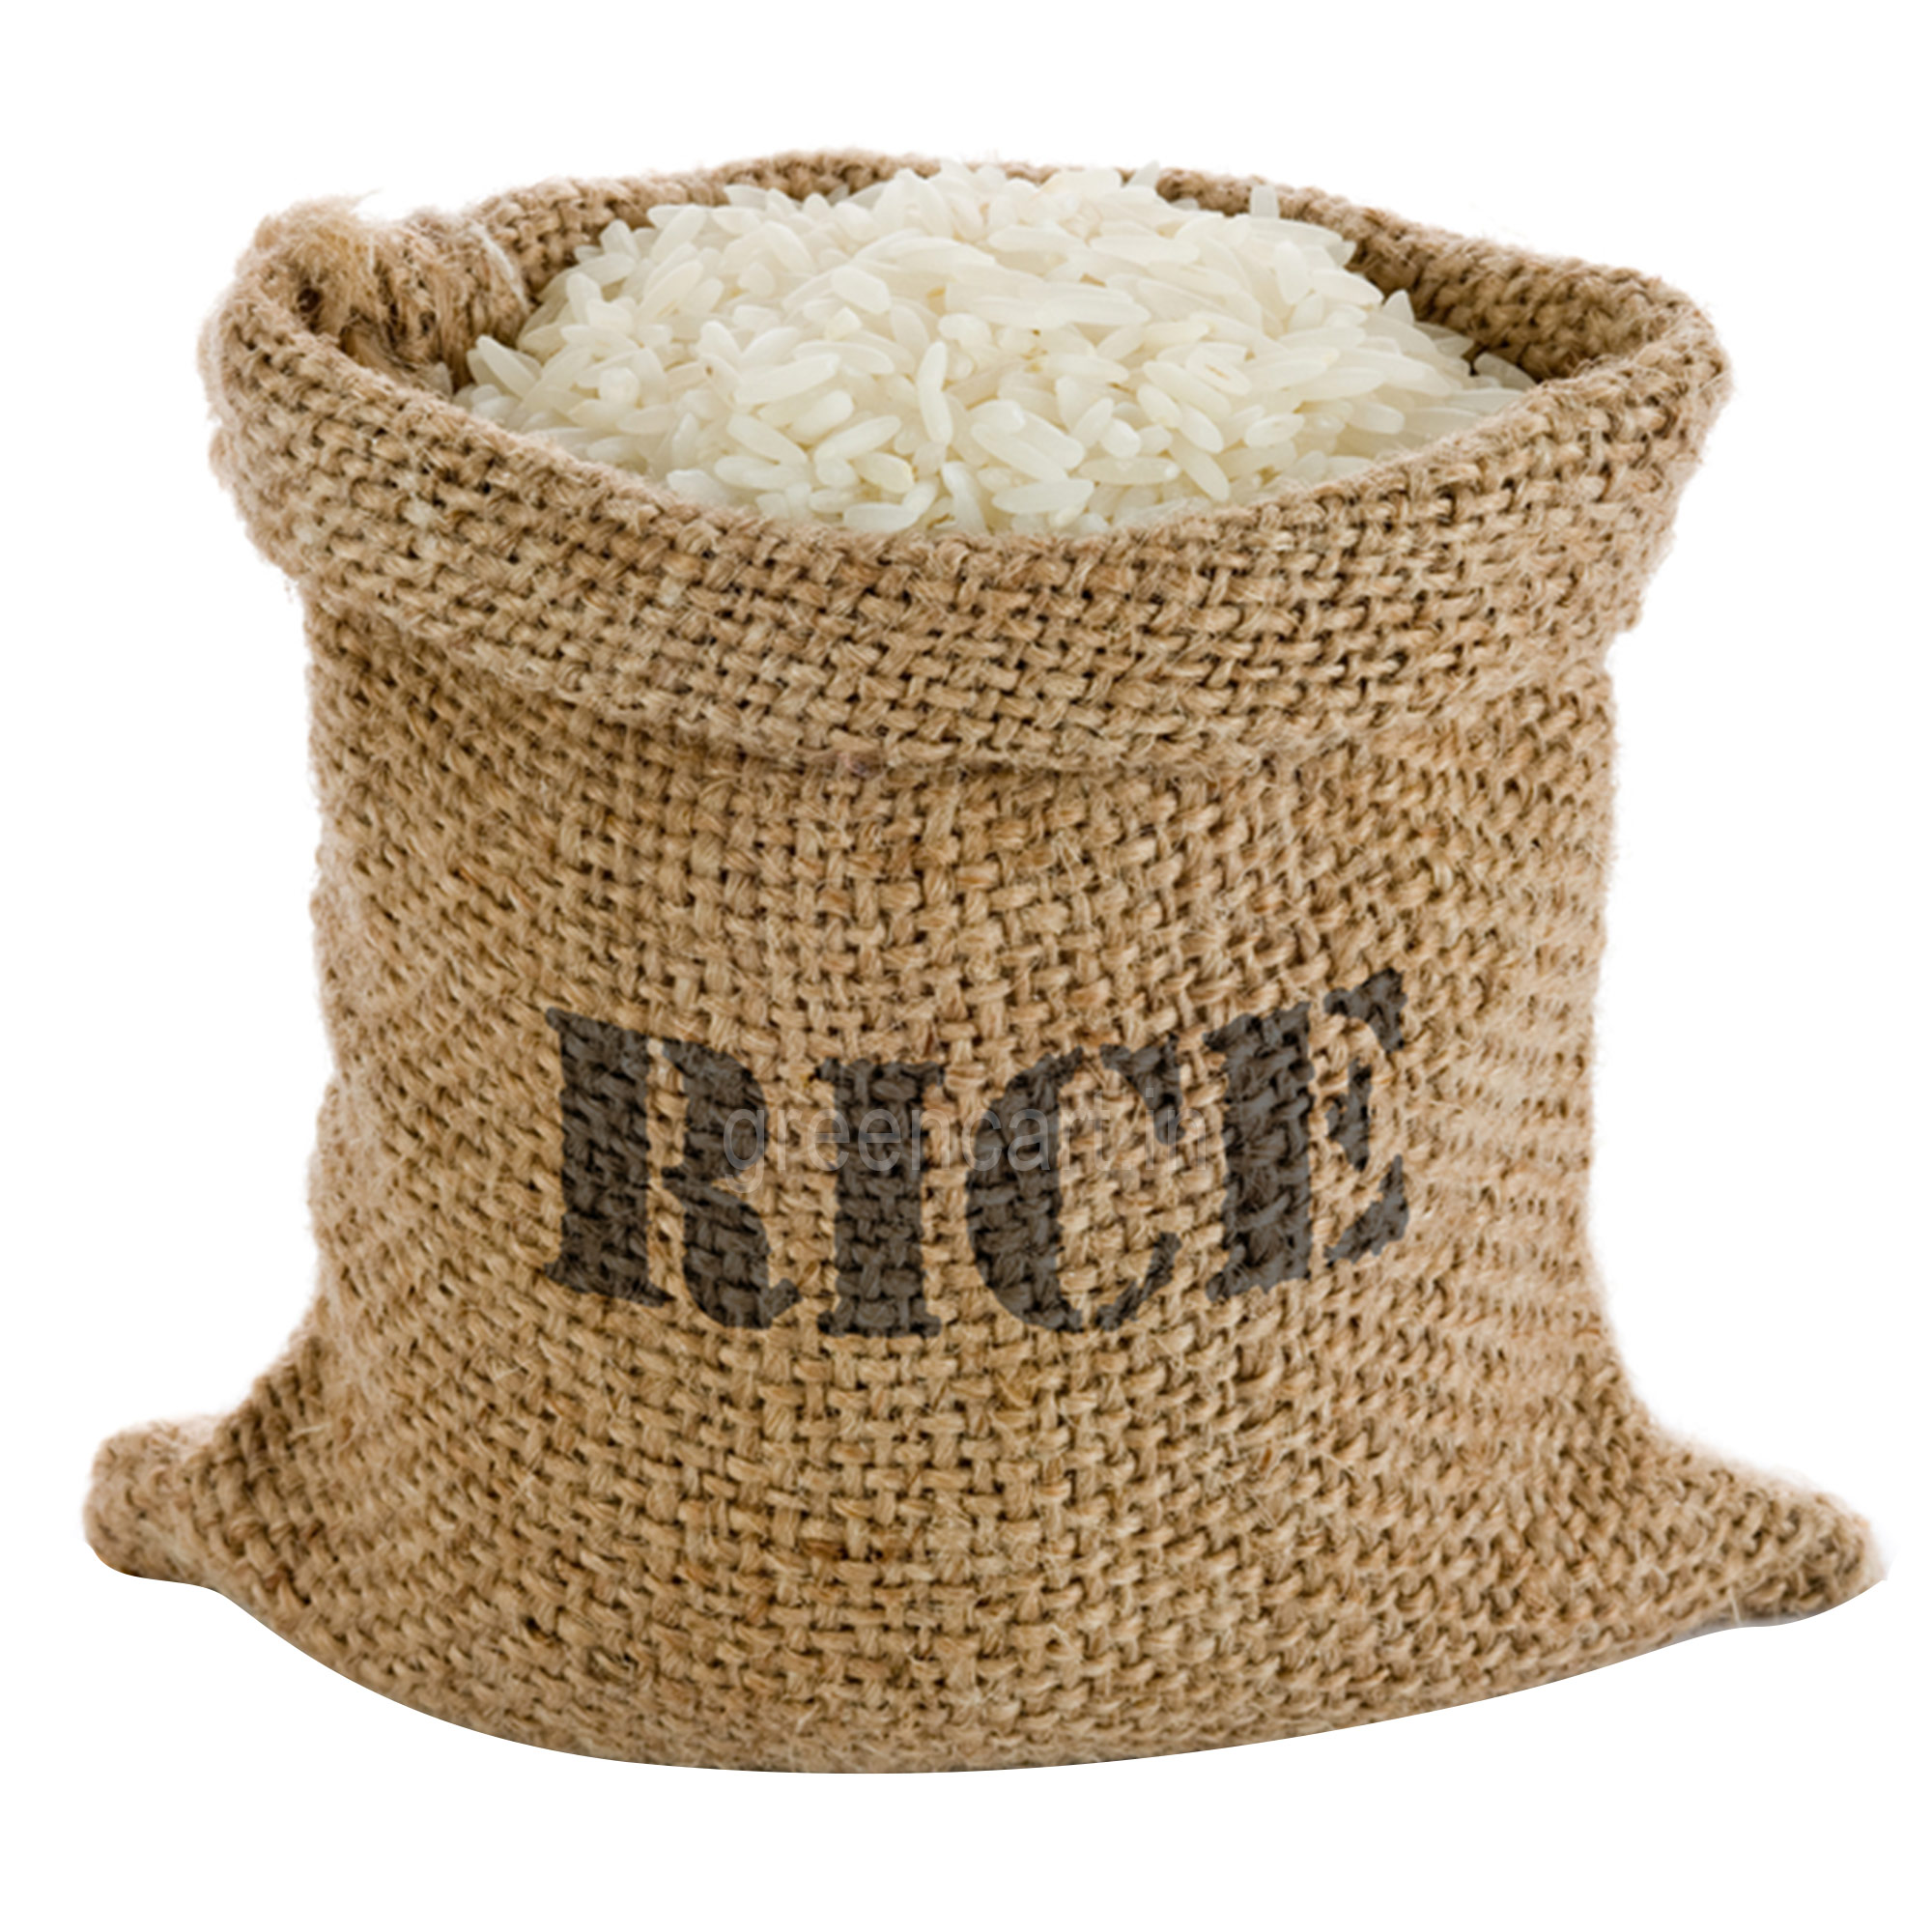 Sack Of Rice PNG - 70849